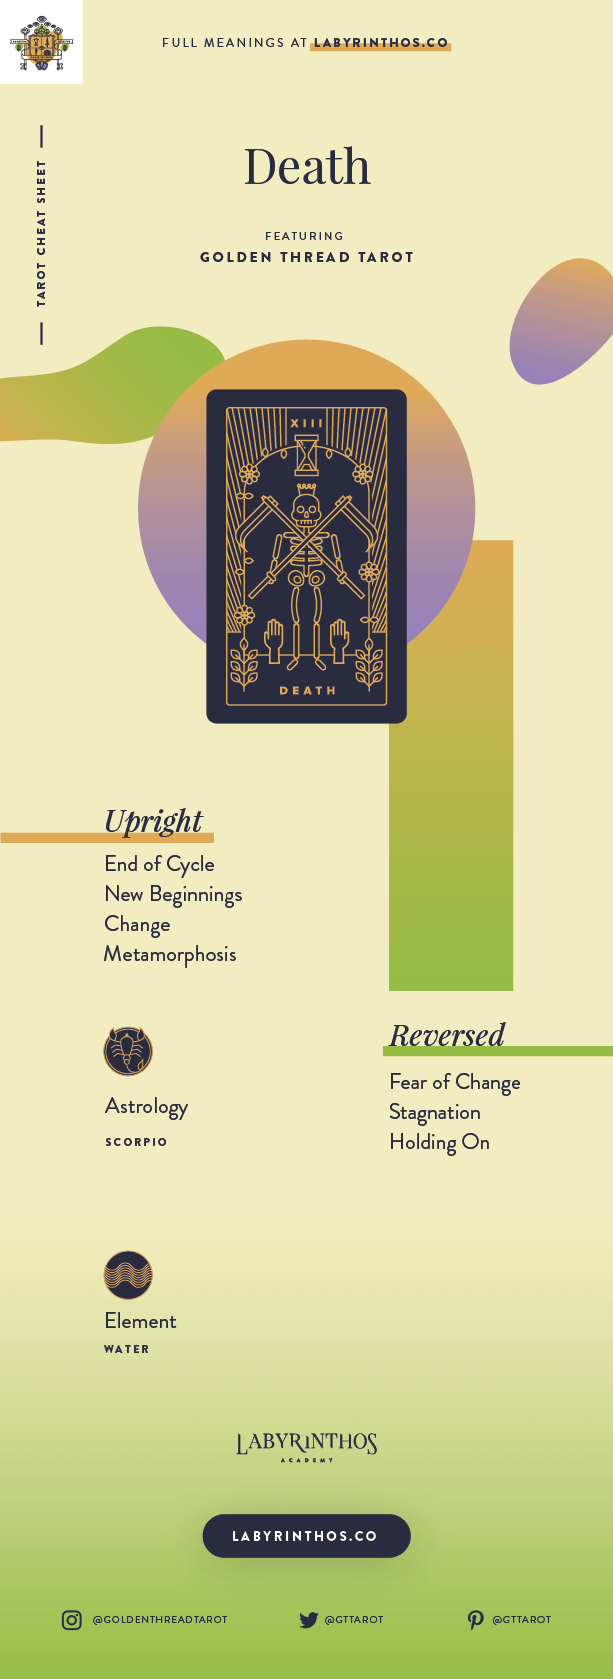 Death Meaning - Tarot Card Meanings Cheat Sheet